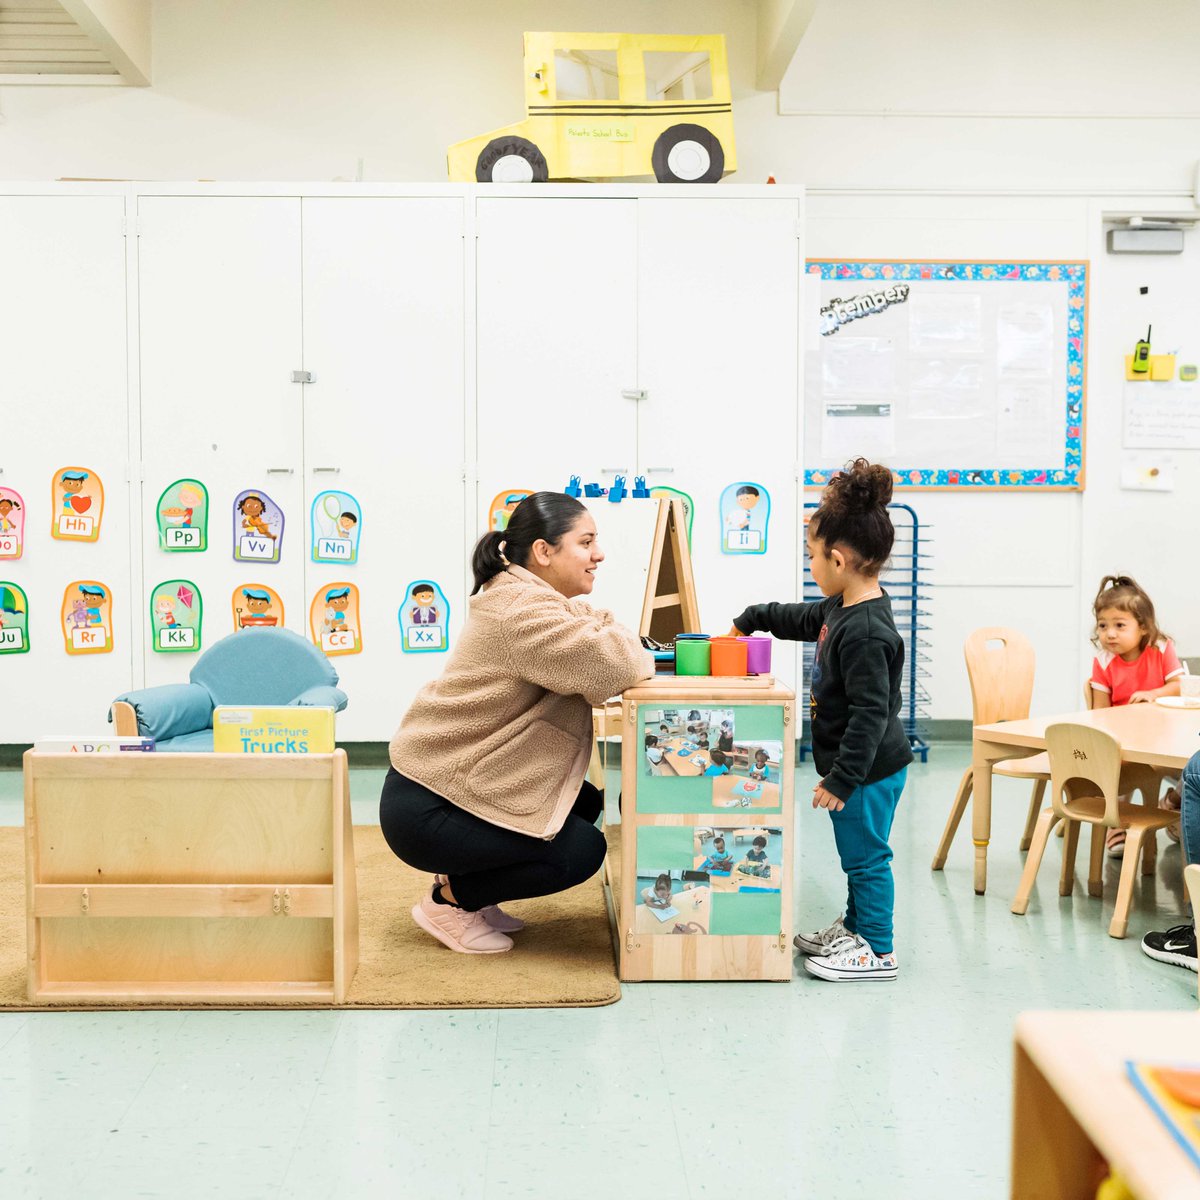 Find out which center is best for your child and schedule a classroom tour today by visiting hubs.li/Q020Yhr30. #enrolltoday #bayareaschool #careprovider